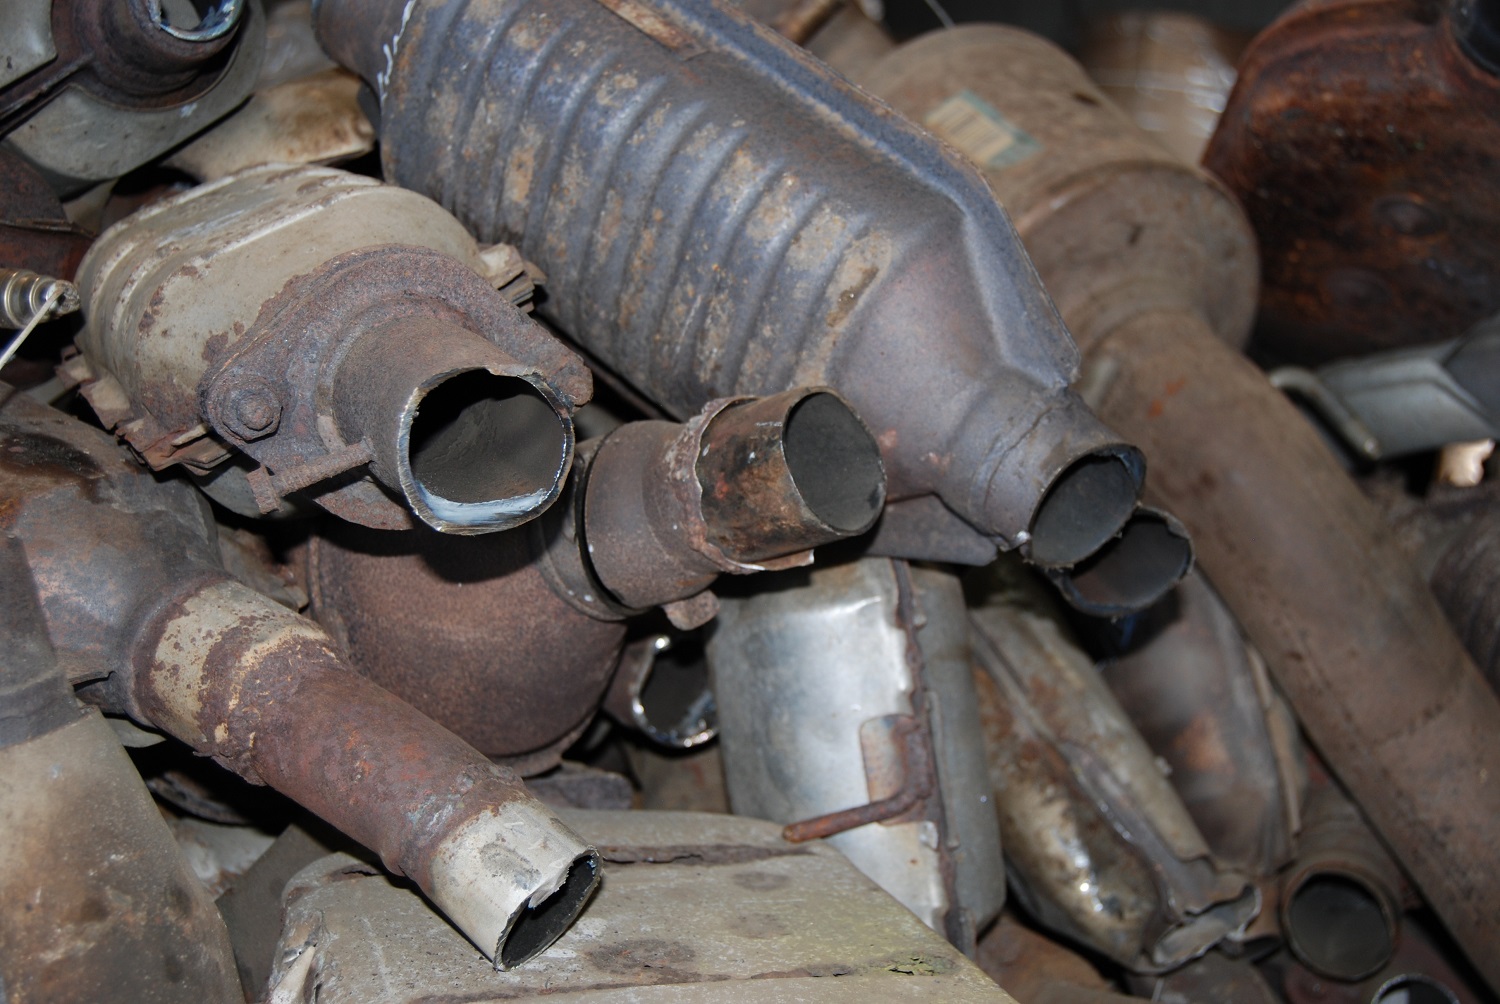 Recyclers’ Working Group Hopes to Combat Catalytic Converter Theft